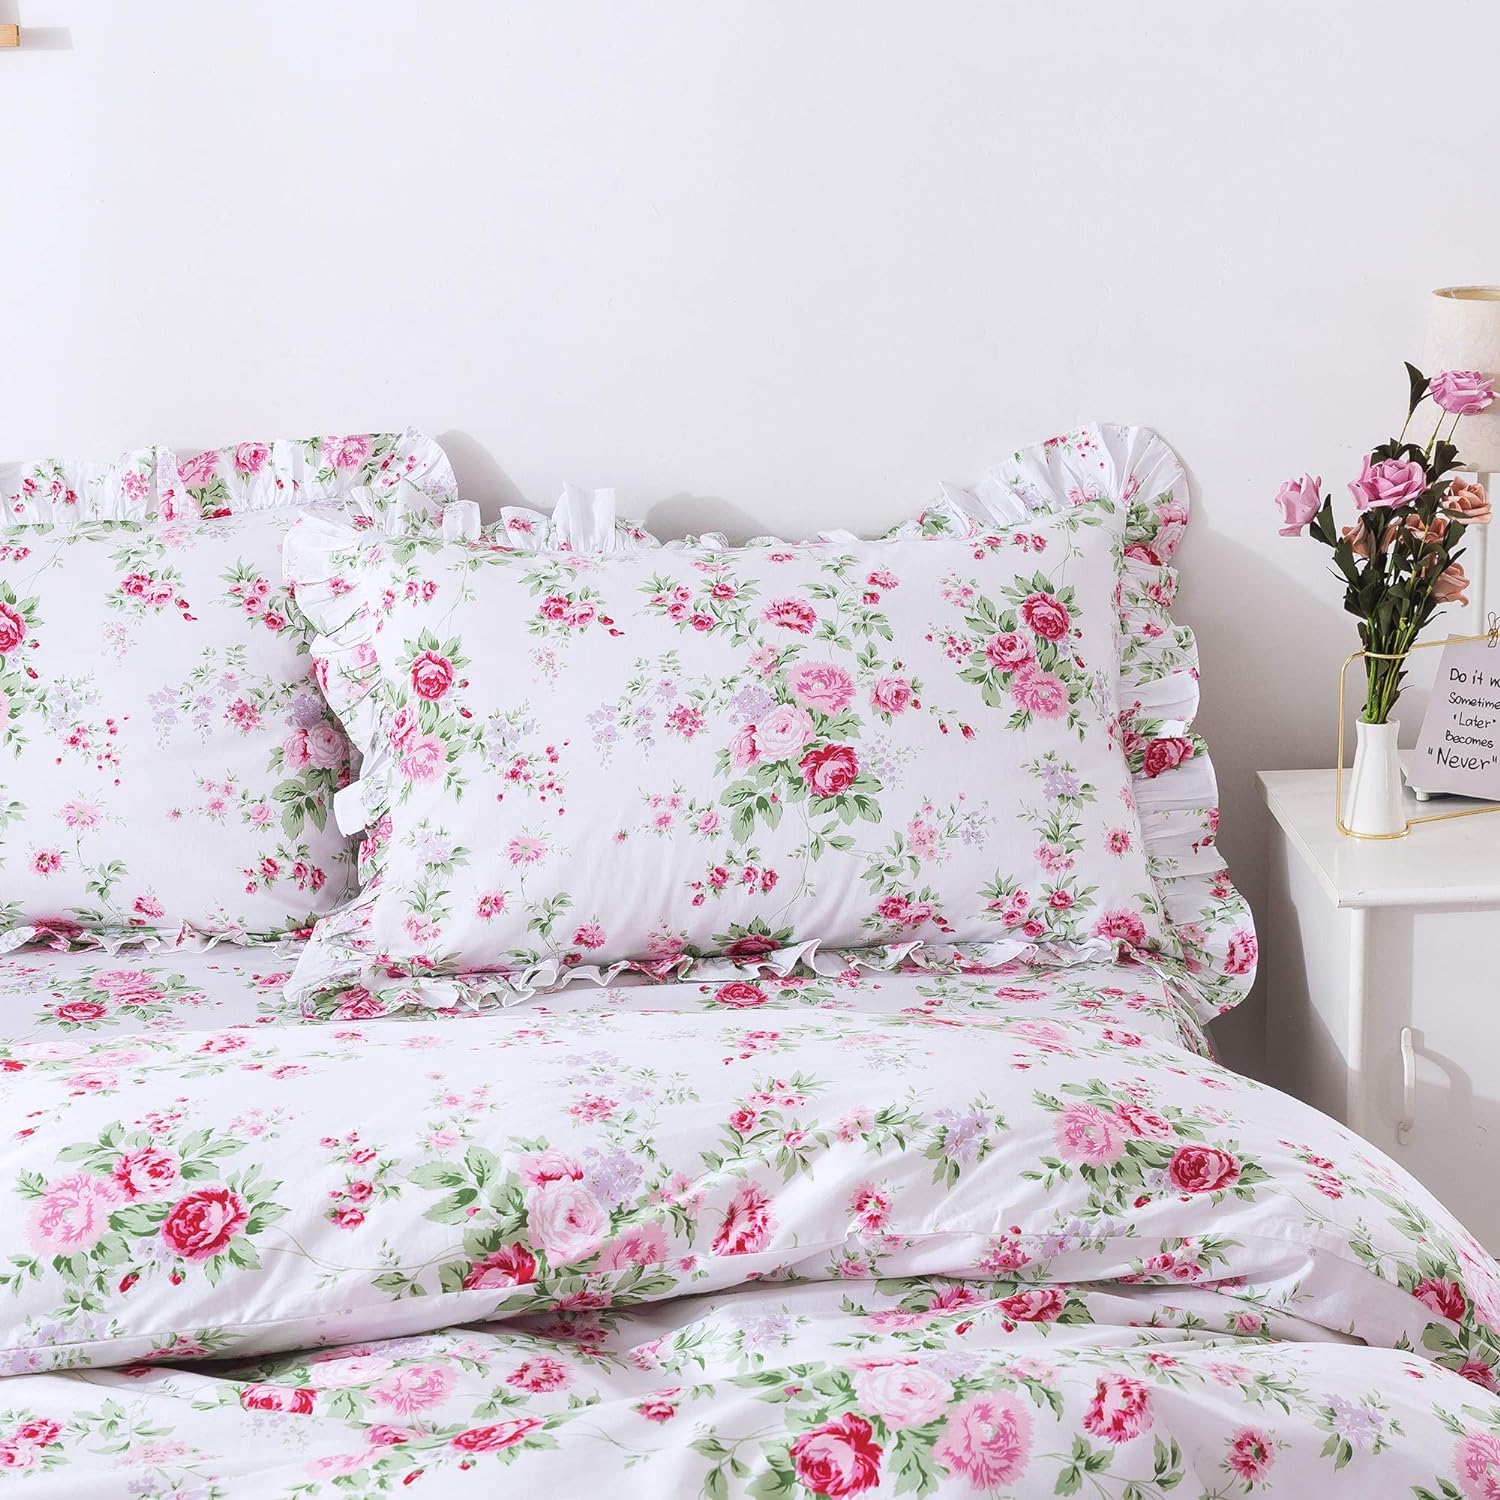 Our Lace Pillowcases series includes many products such as Fadfay Shabby Floral Bedding and Fadfay Farmhouse Bedding, each of which has its own characteristics and shows different styles and charms.